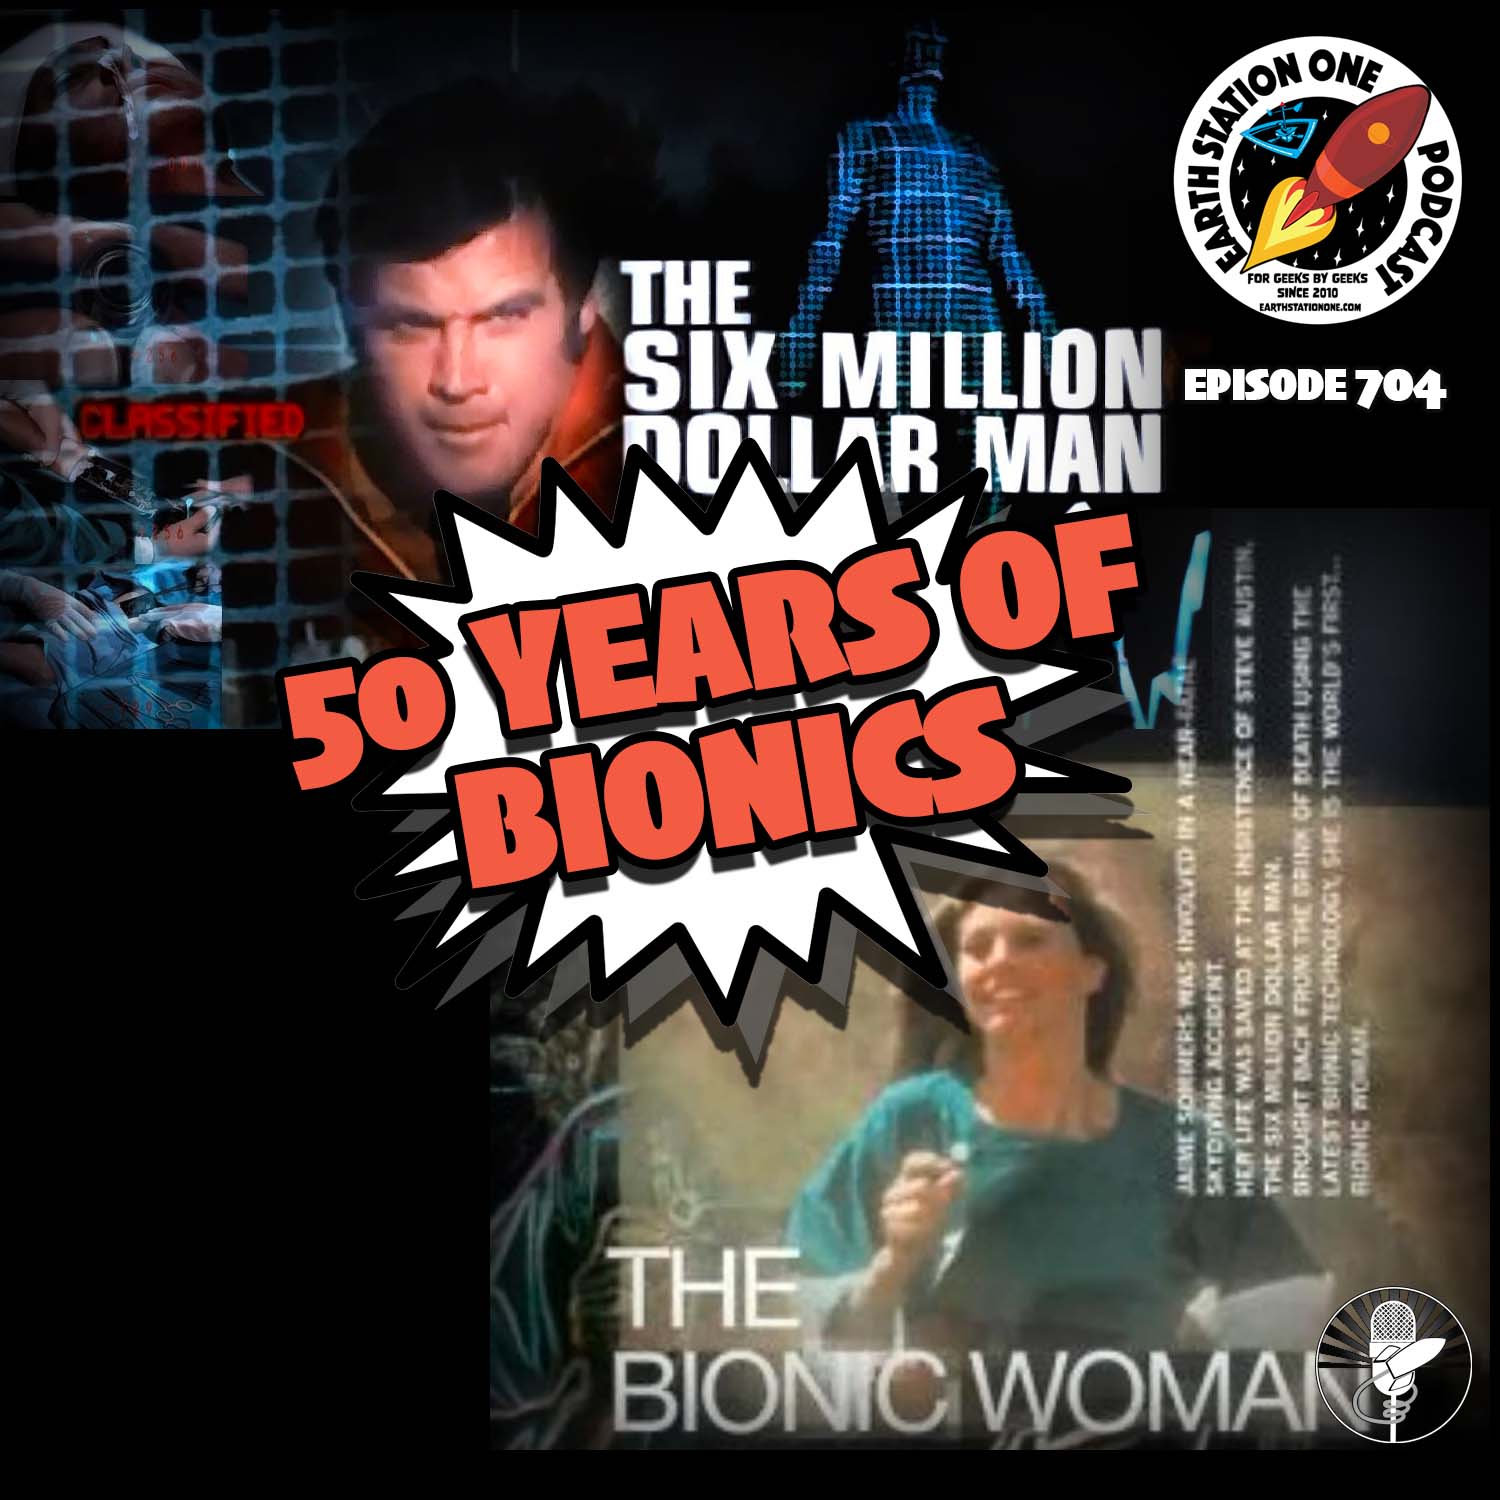 Earth Station One Podcast Ep 704 - 50 Years of Bionics